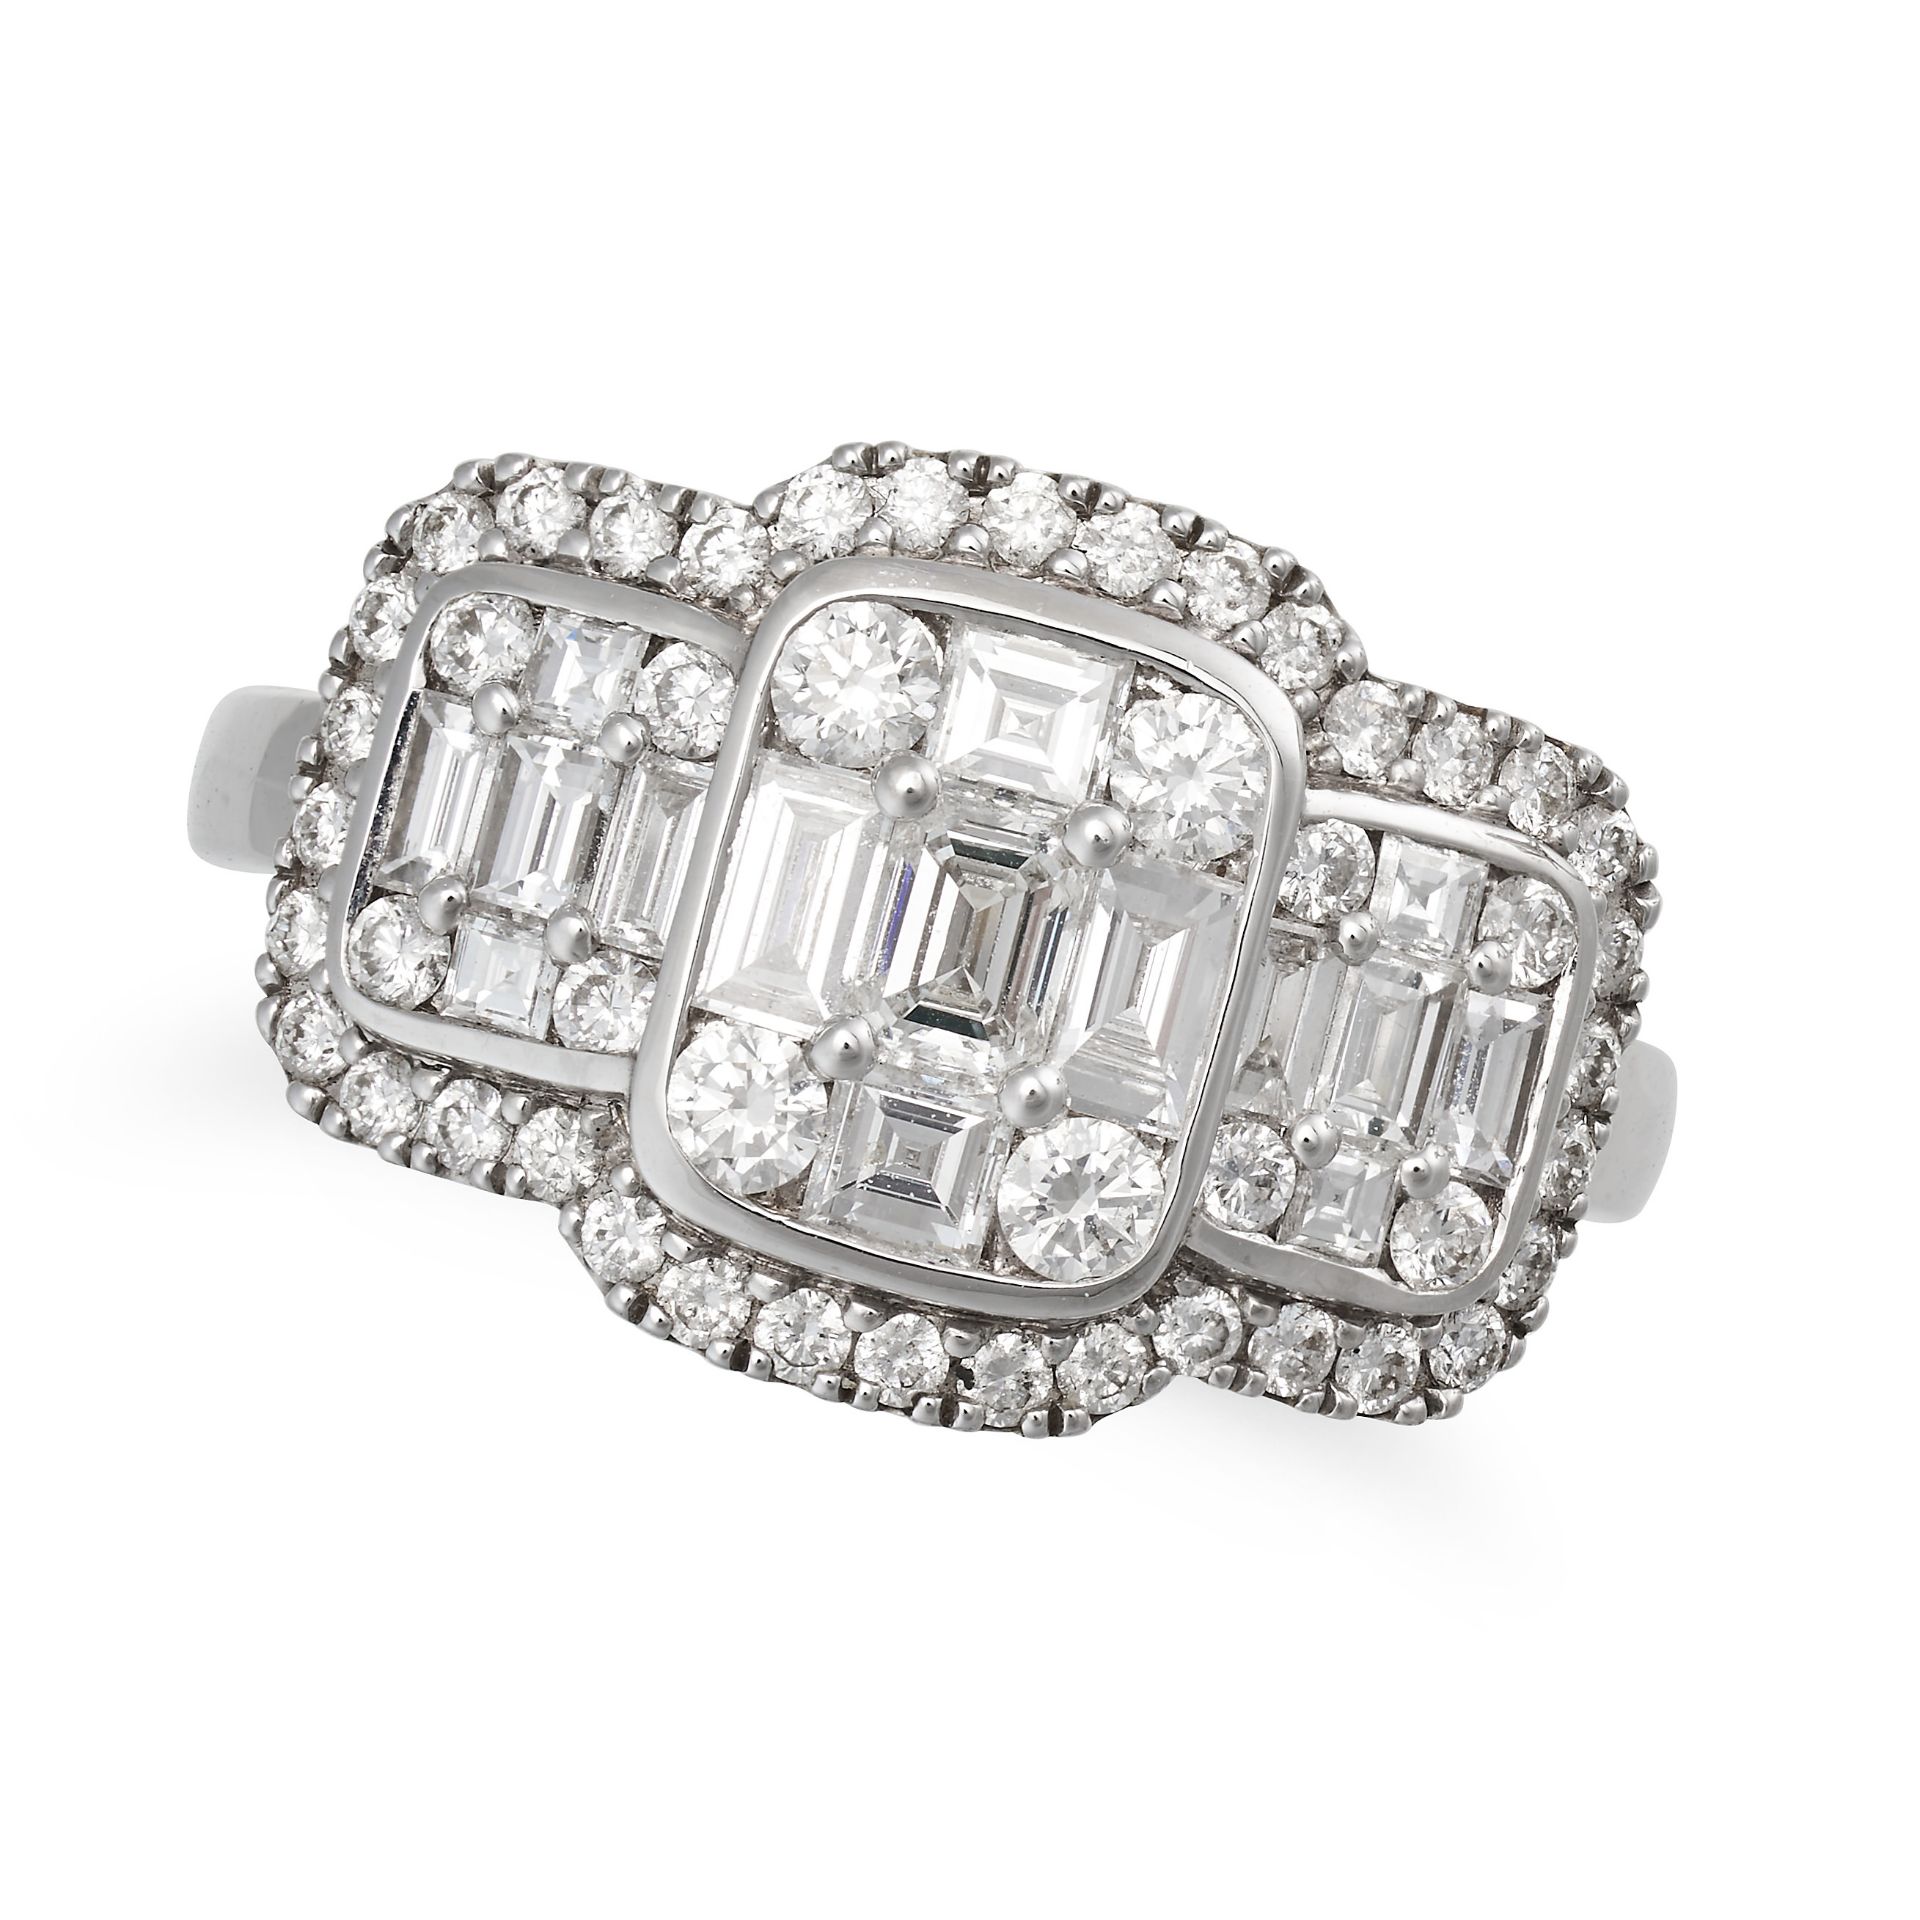 NO RESERVE - A DIAMOND ILLUSION CLUSTER RING in 18ct white gold, comprising three illusion set cl...